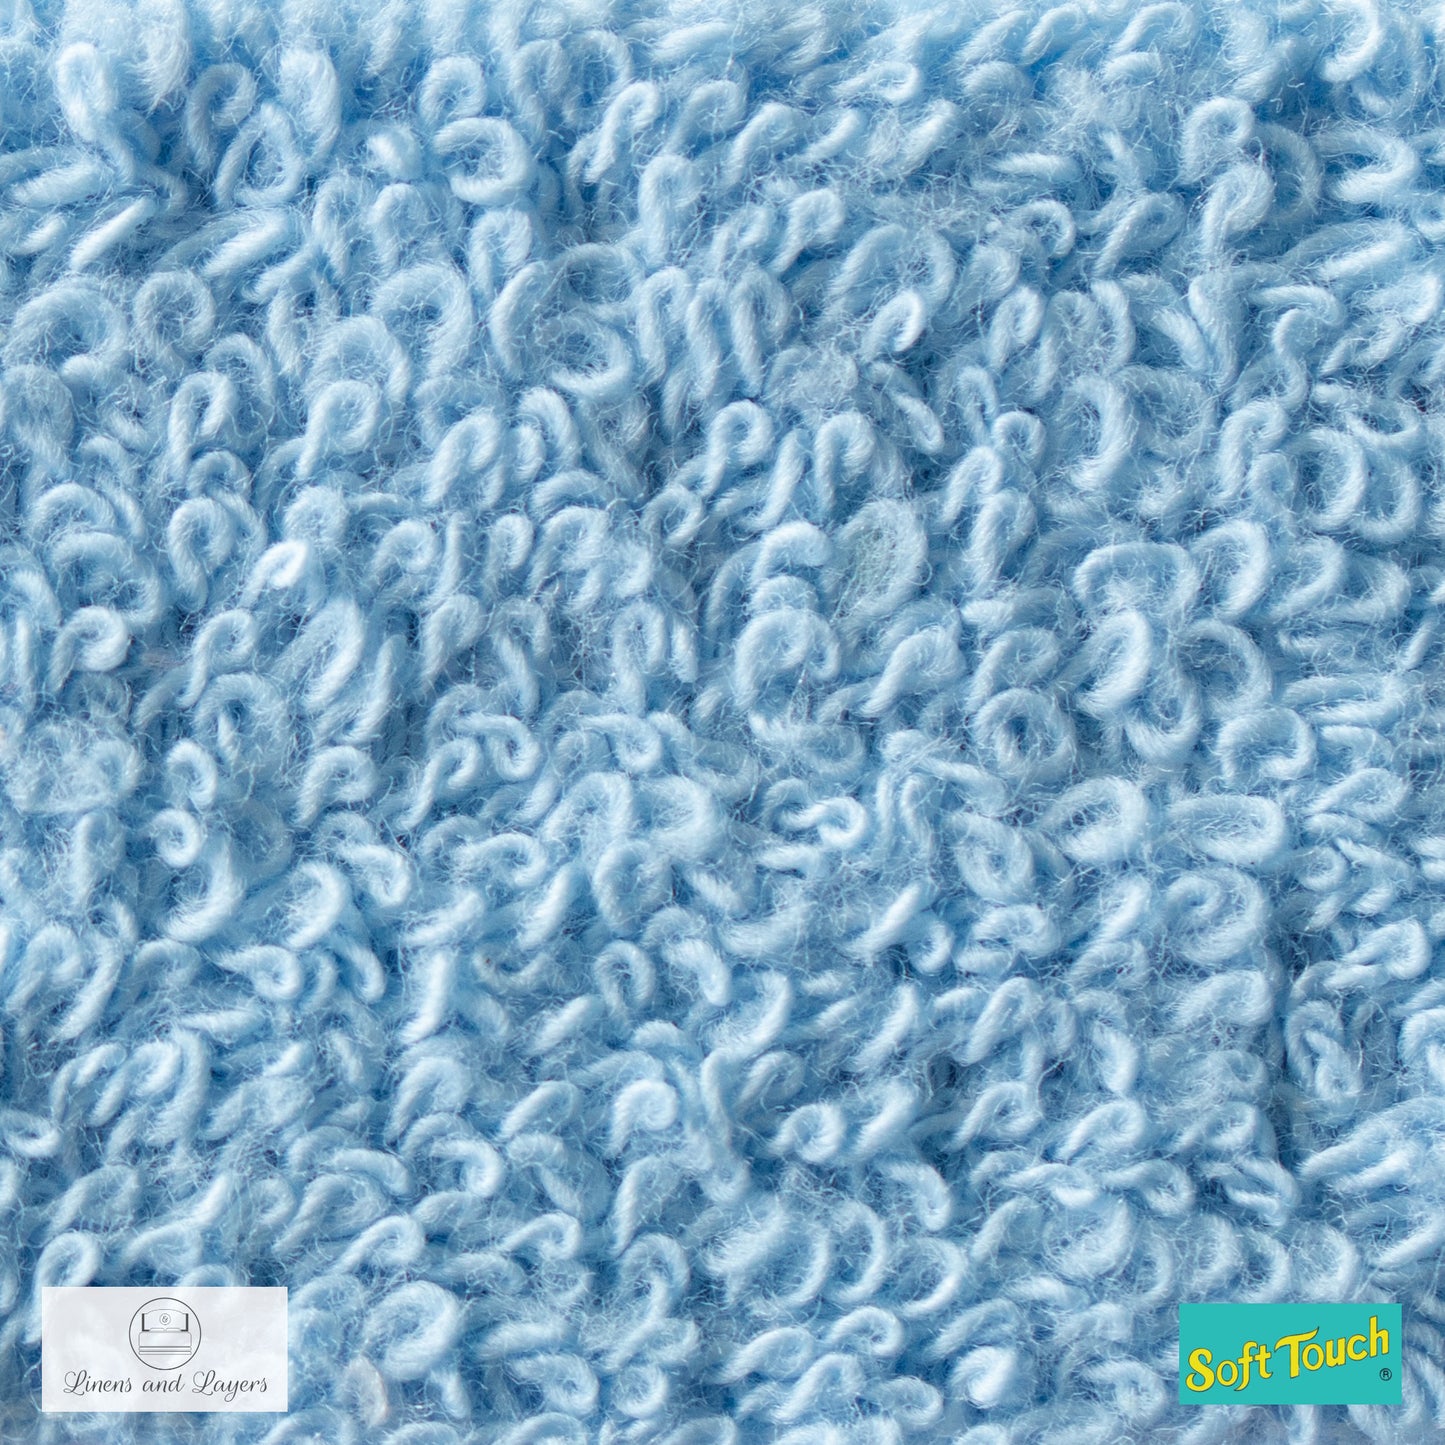 Soft Touch Face Towel (370 GSM) - H-1313 Terrycloth - 13x13 inches